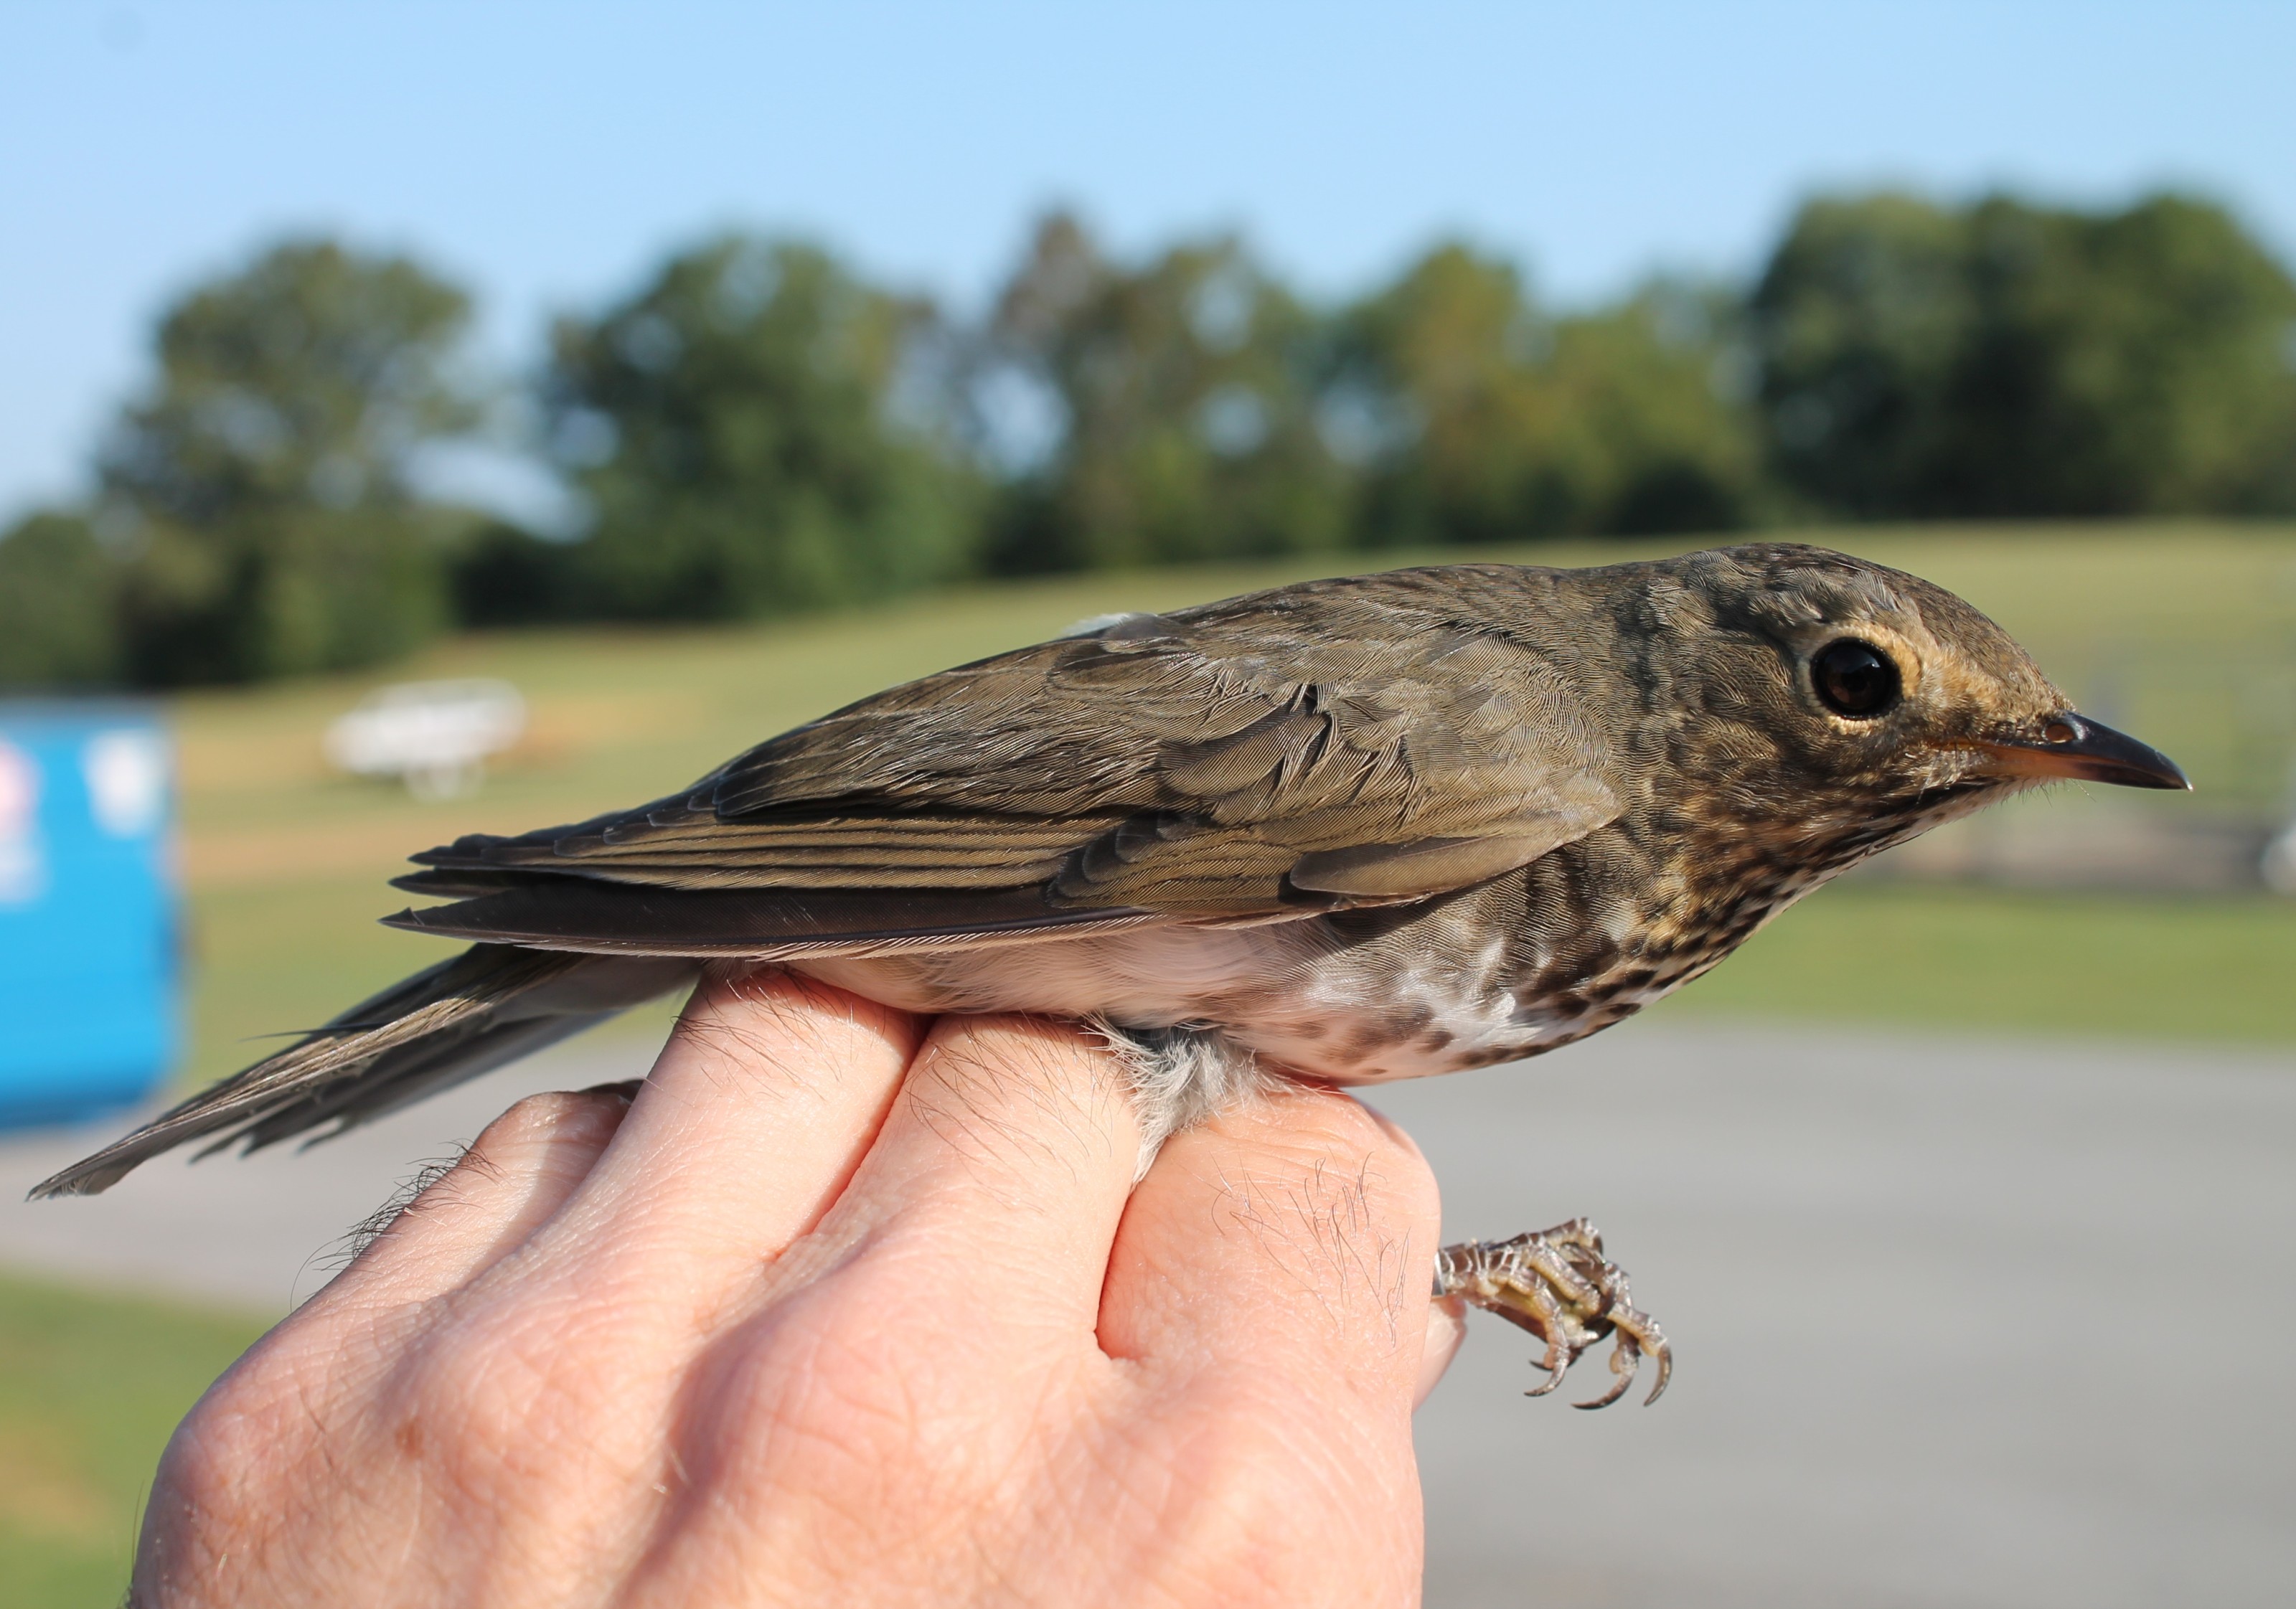 Swainson's thrush being held in a person's hand